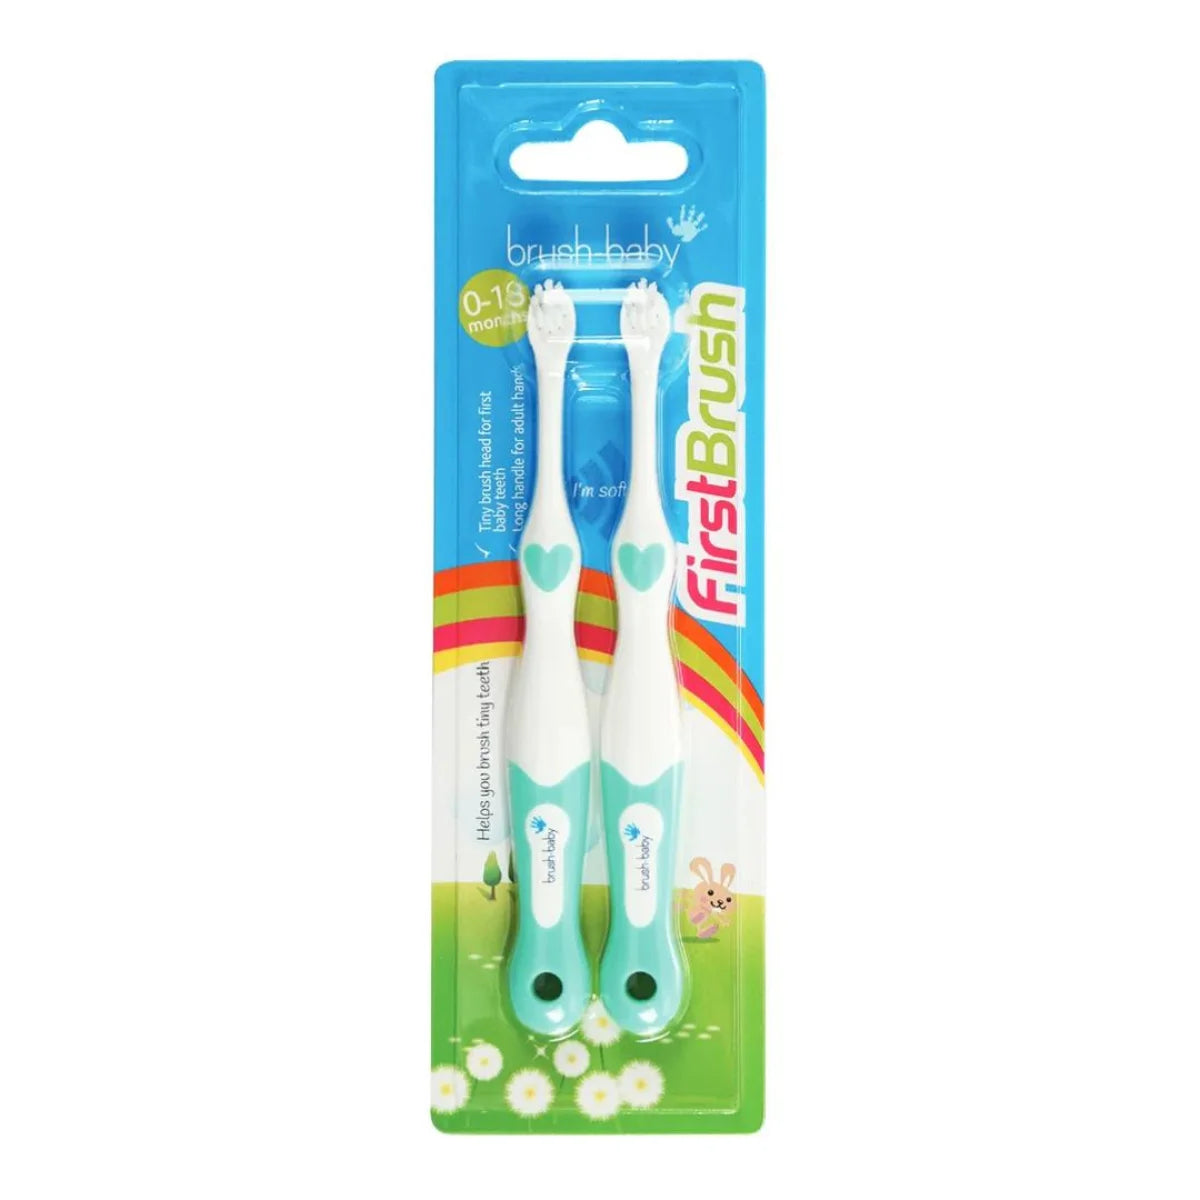 teal firstbrush first toothbrush for babies and toddlers packaging